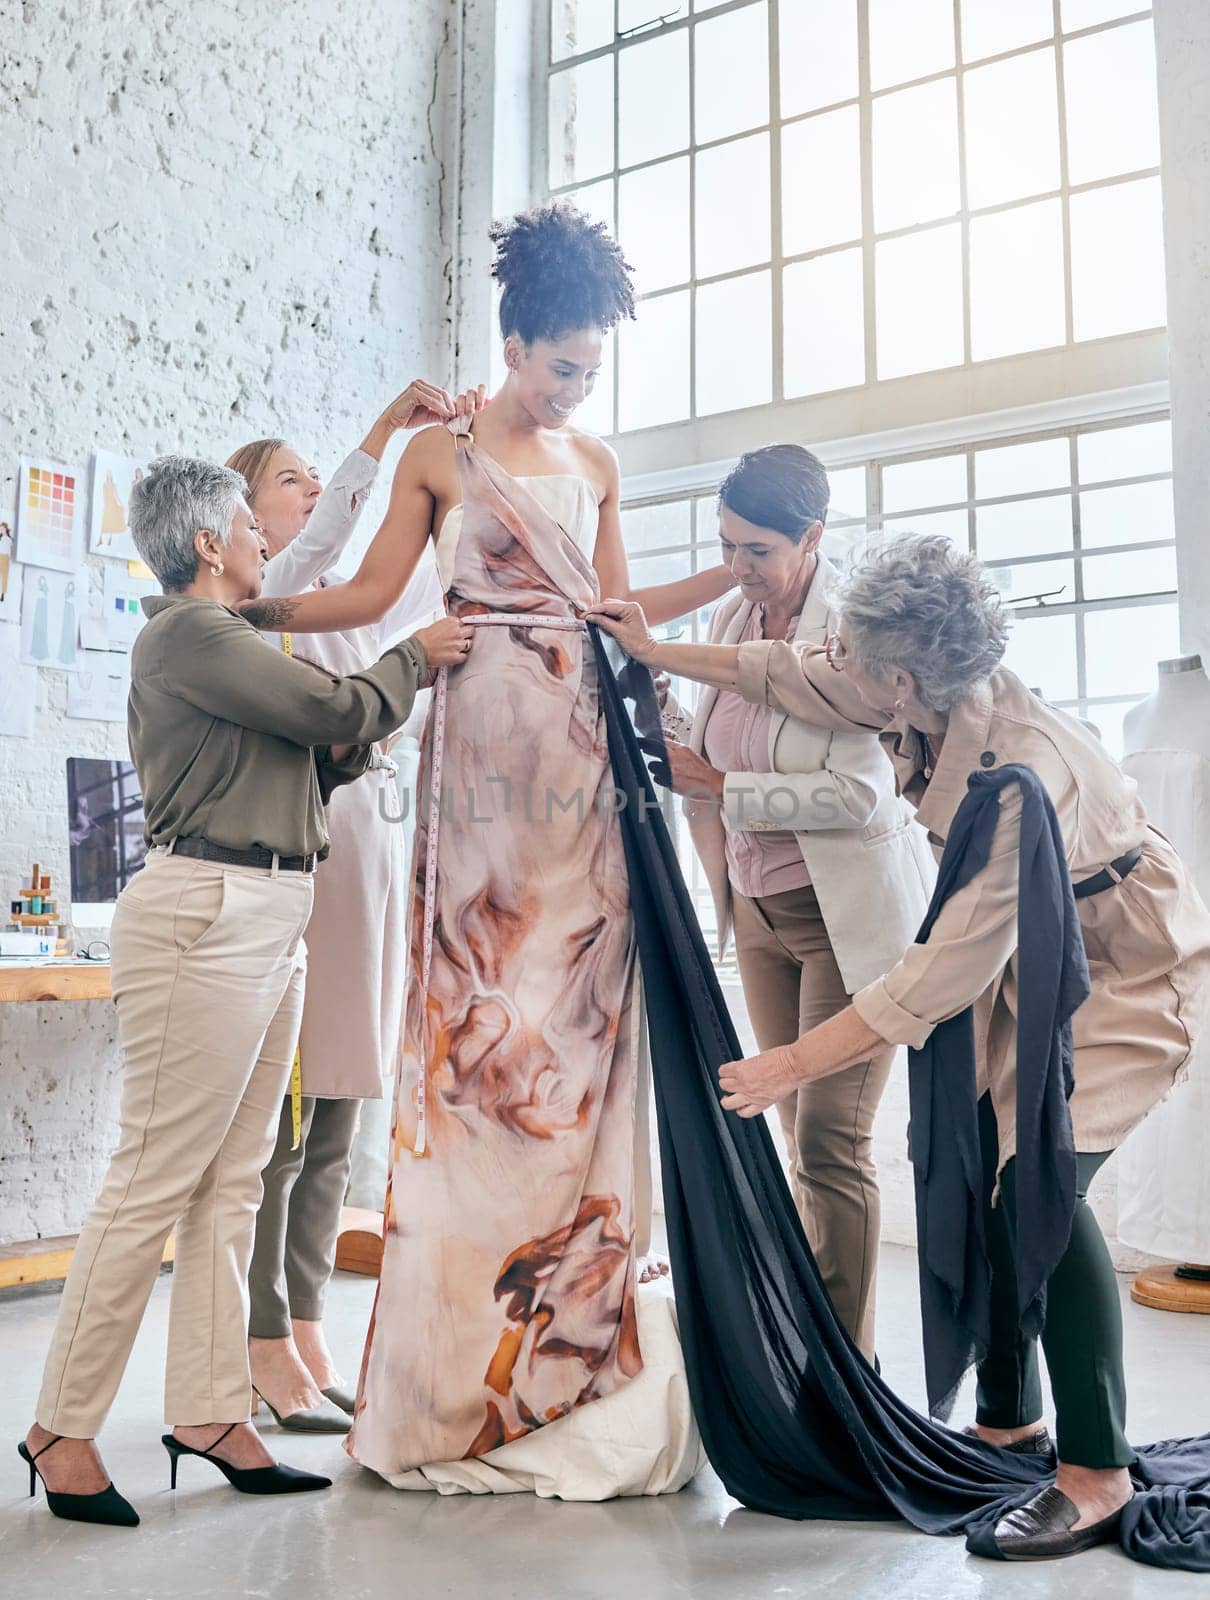 Designer women, help model and fitting dress, design and teamwork for runway fashion vision in workshop. Happy creative team, woman collaboration and test fabric with diversity, goals or helping hand by YuriArcurs